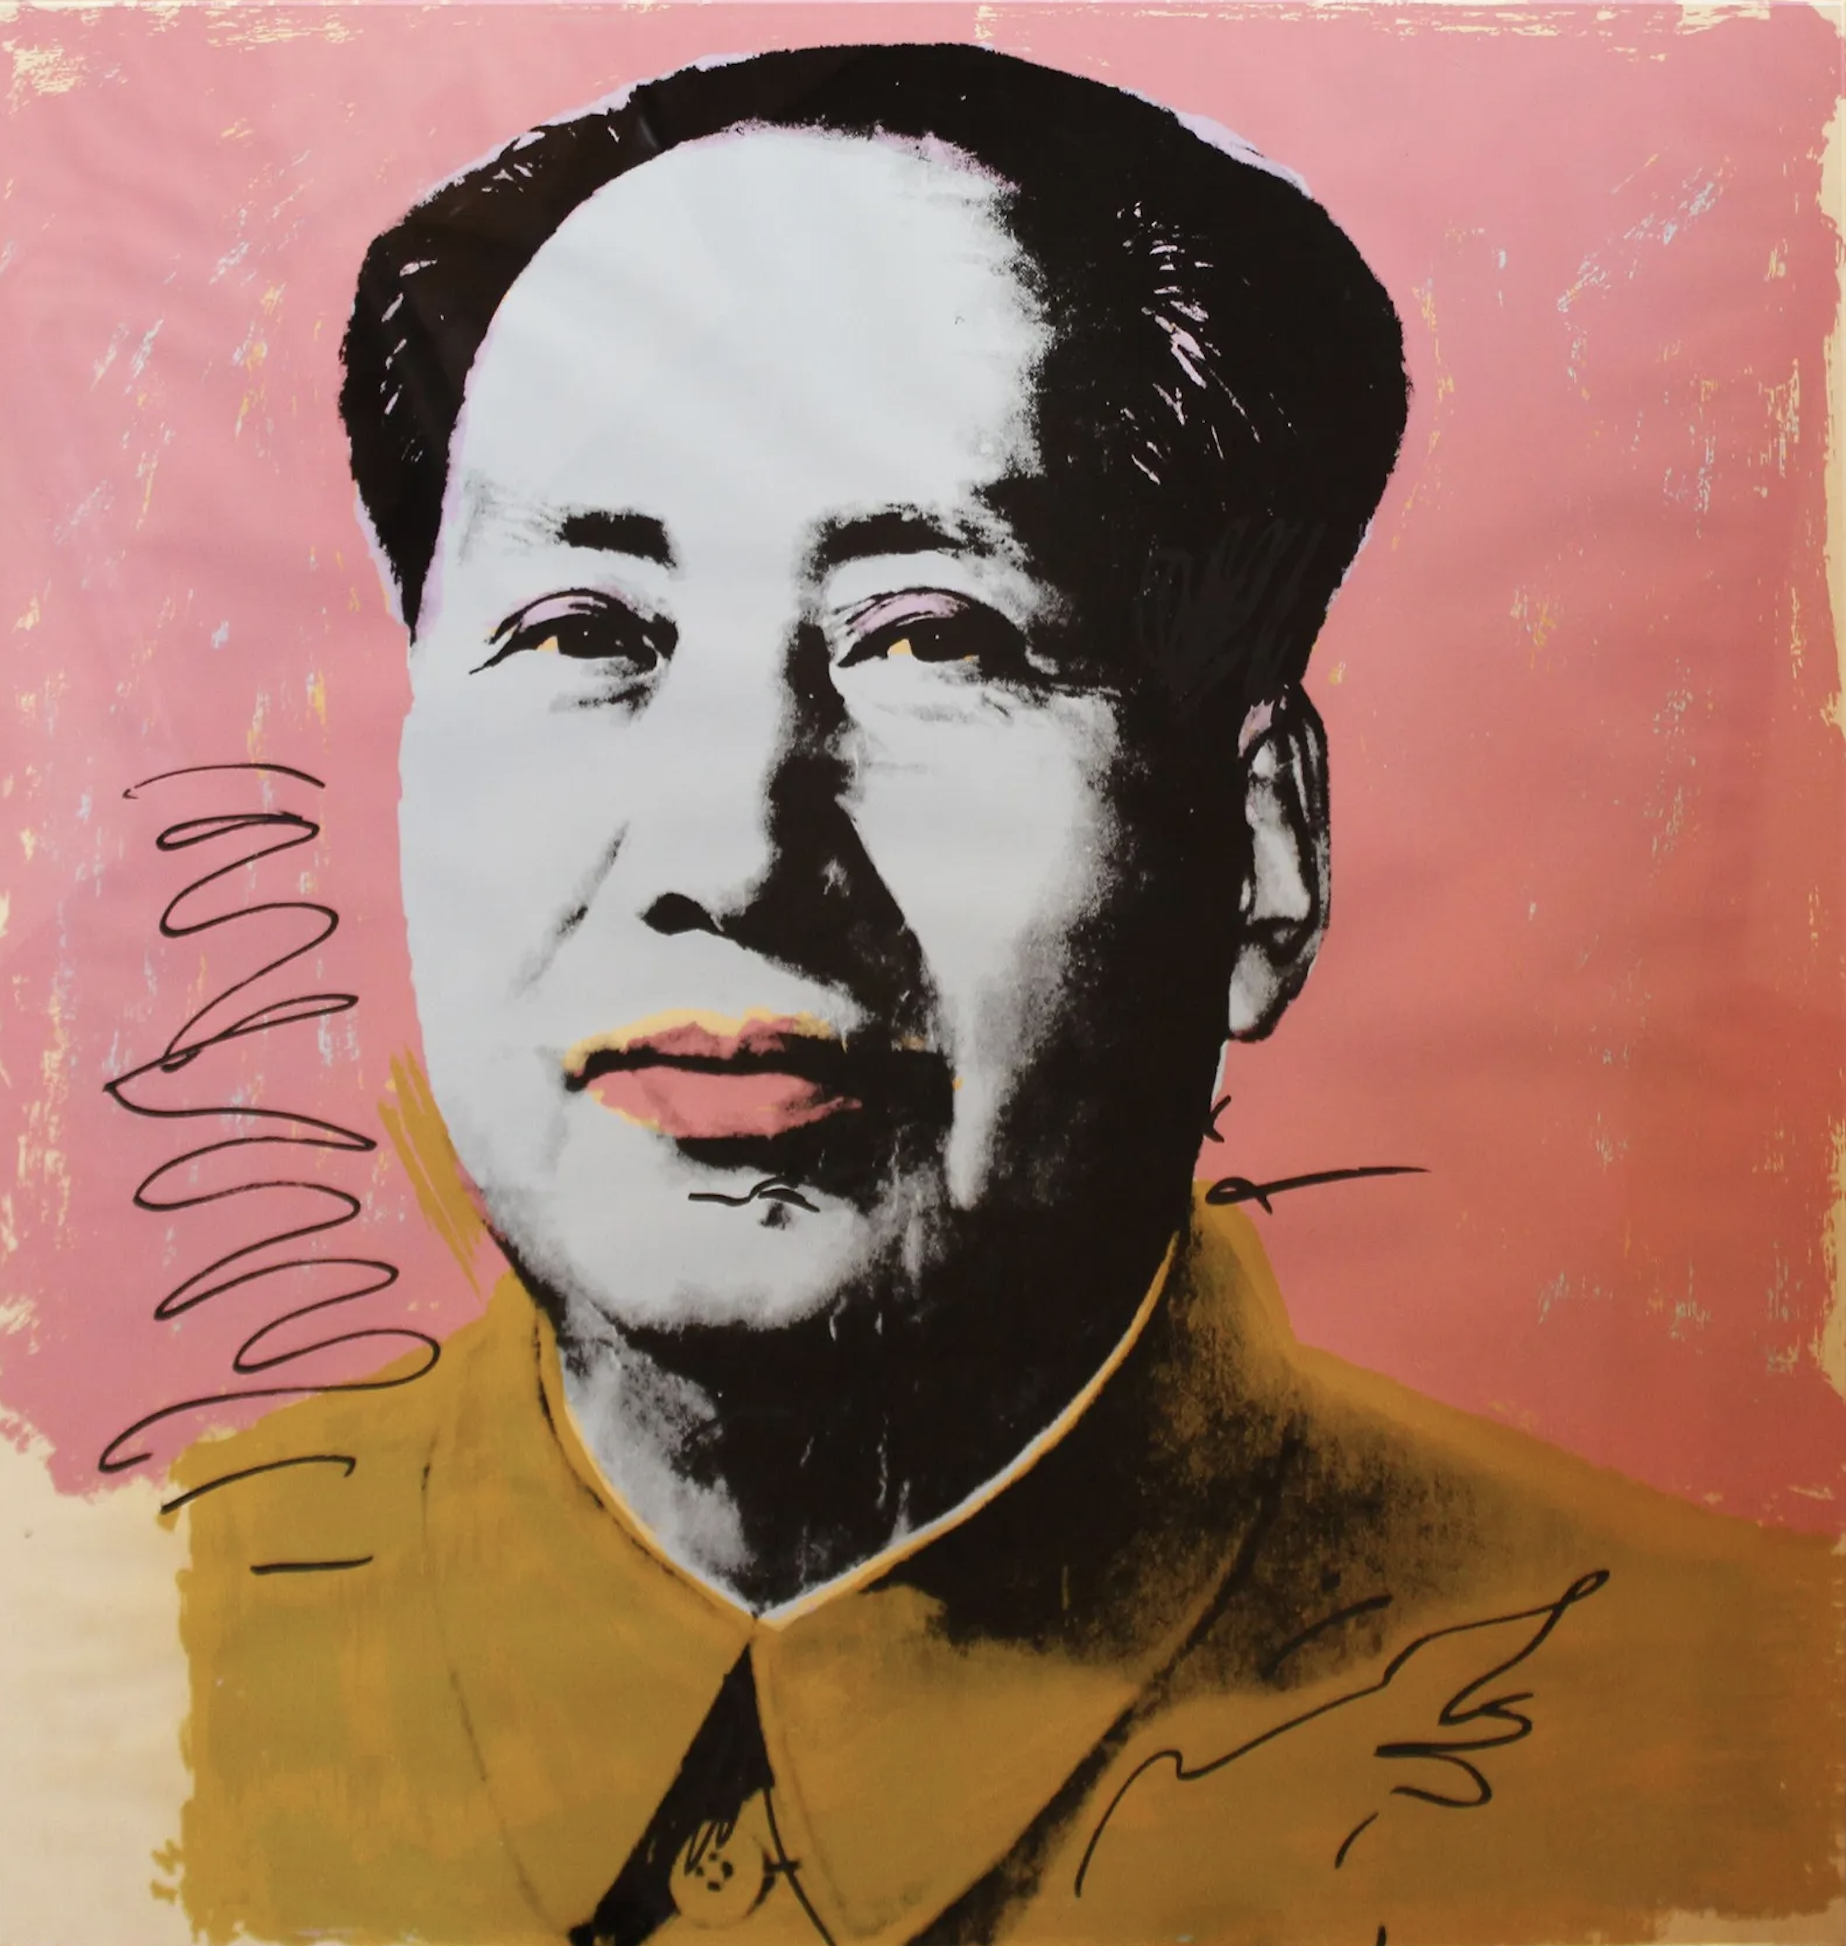 Andy Warhol, ‘Mao,’ estimated at $70,000-$80,000. Image courtesy of Santa Monica Auctions and LiveAuctioneers